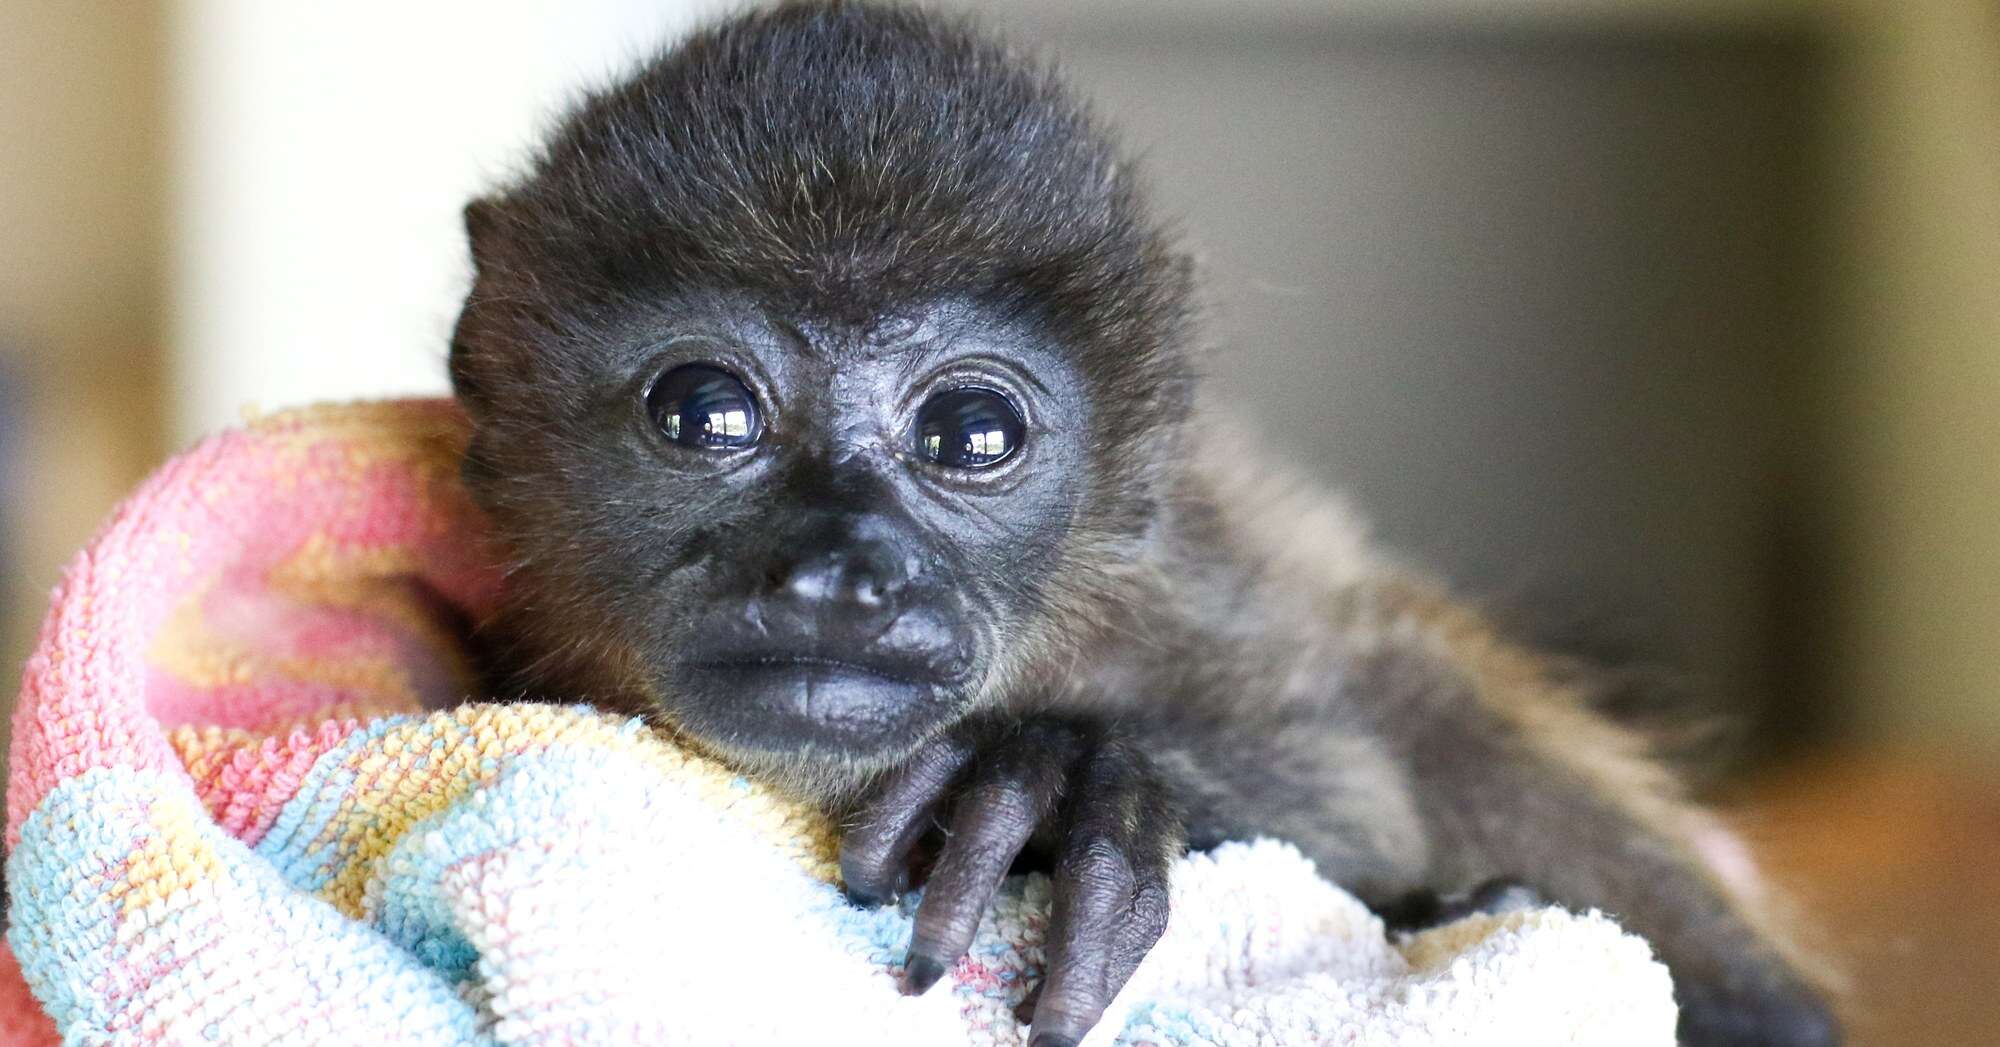 Orphaned howler monkey at rescue center